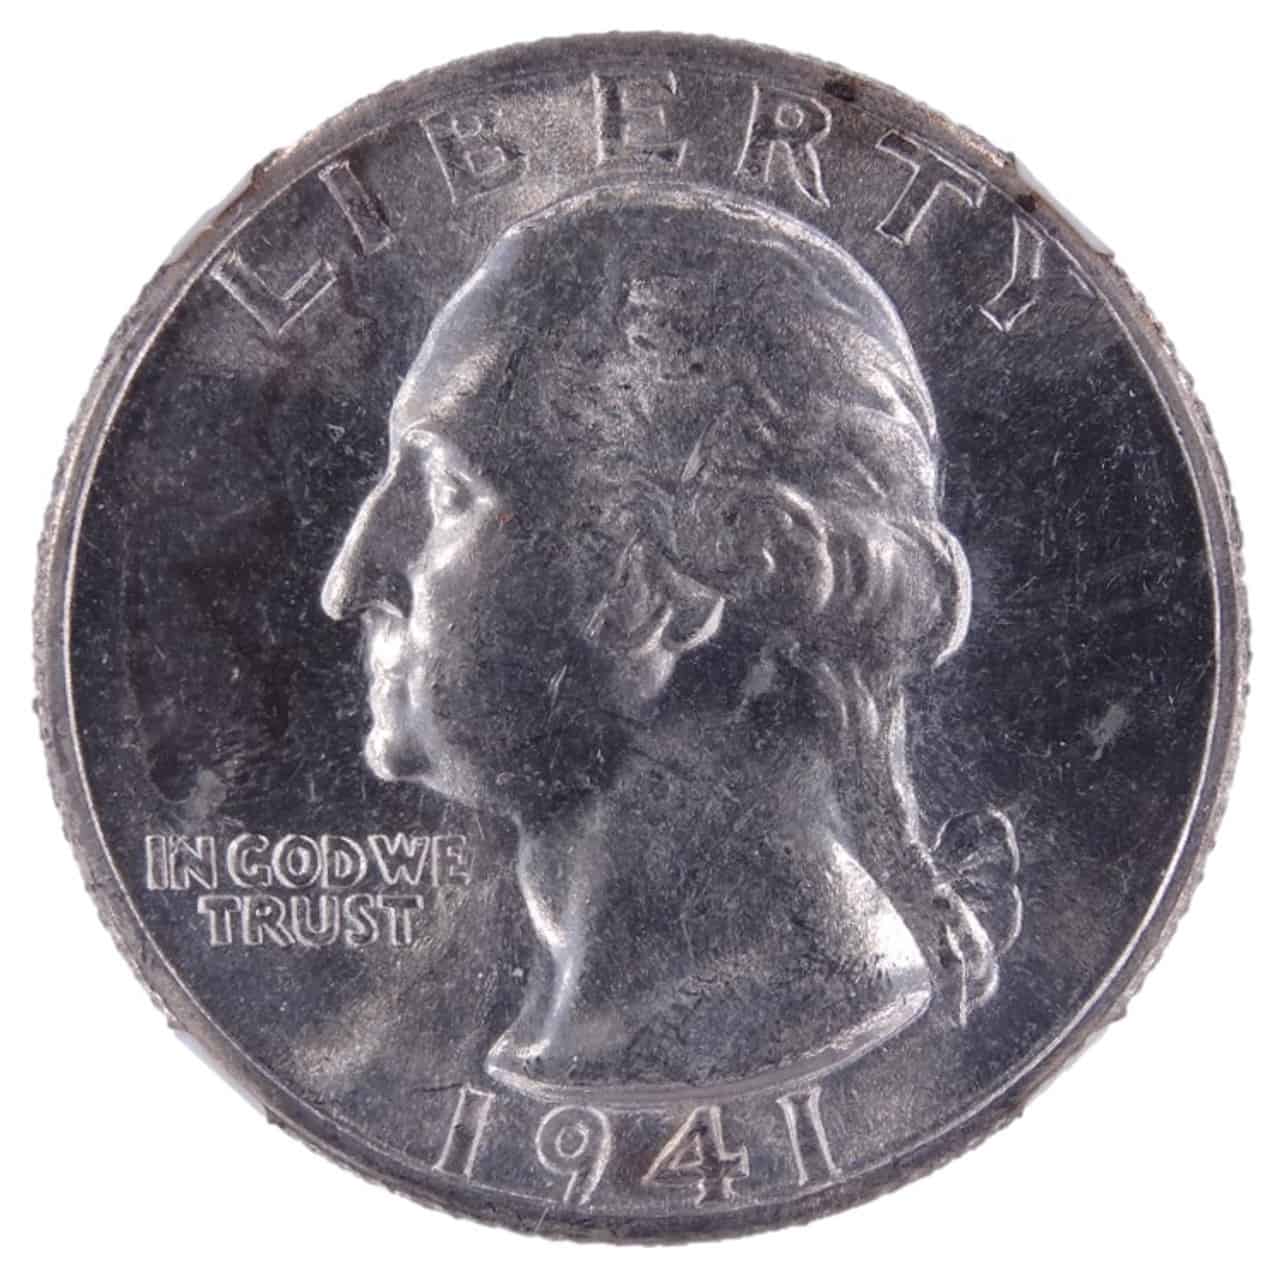 The Obverse of the 1941 Quarter